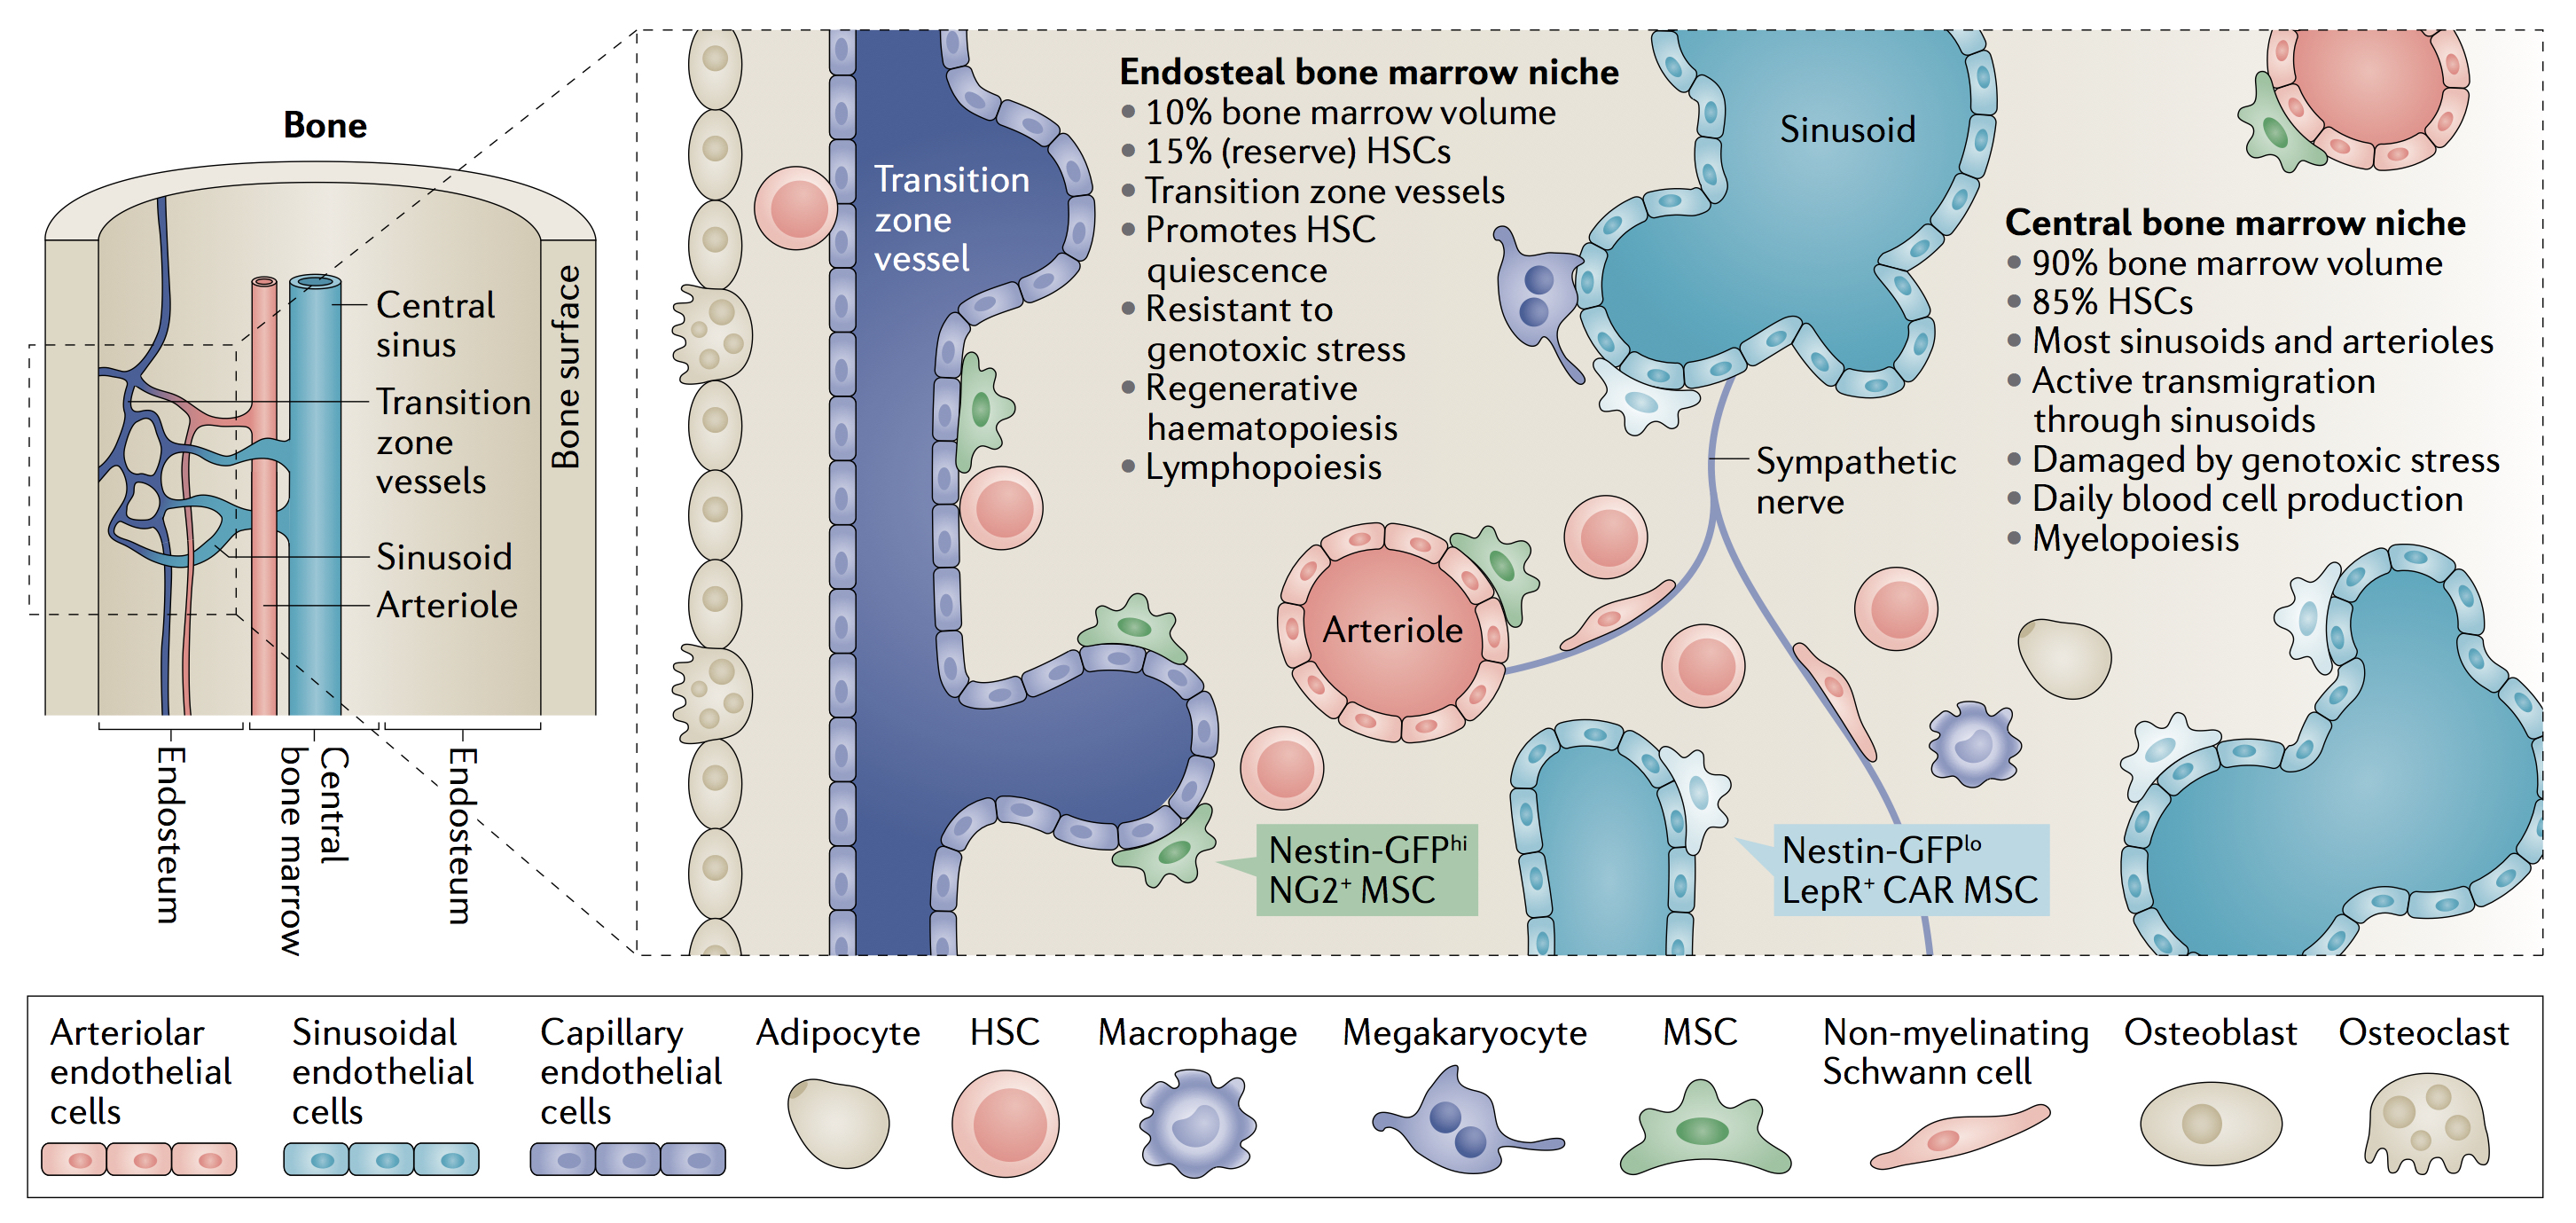 Diagram showing main features of anatomically-defined haematopoietic stem cell niches in the mouse bone marrow.